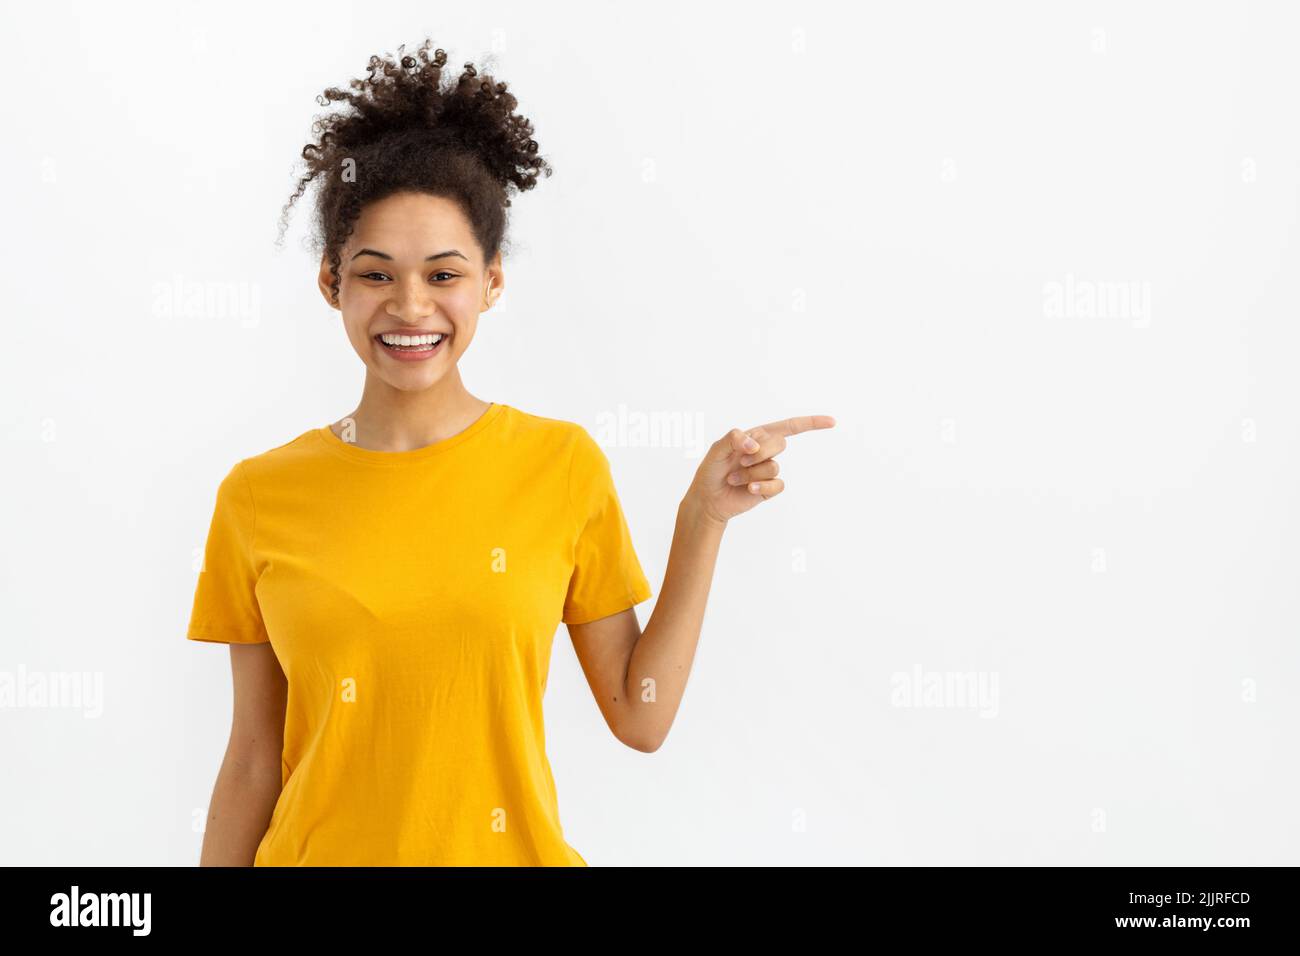 Happy woman smiling with his finger pointing on white background with copy space Stock Photo